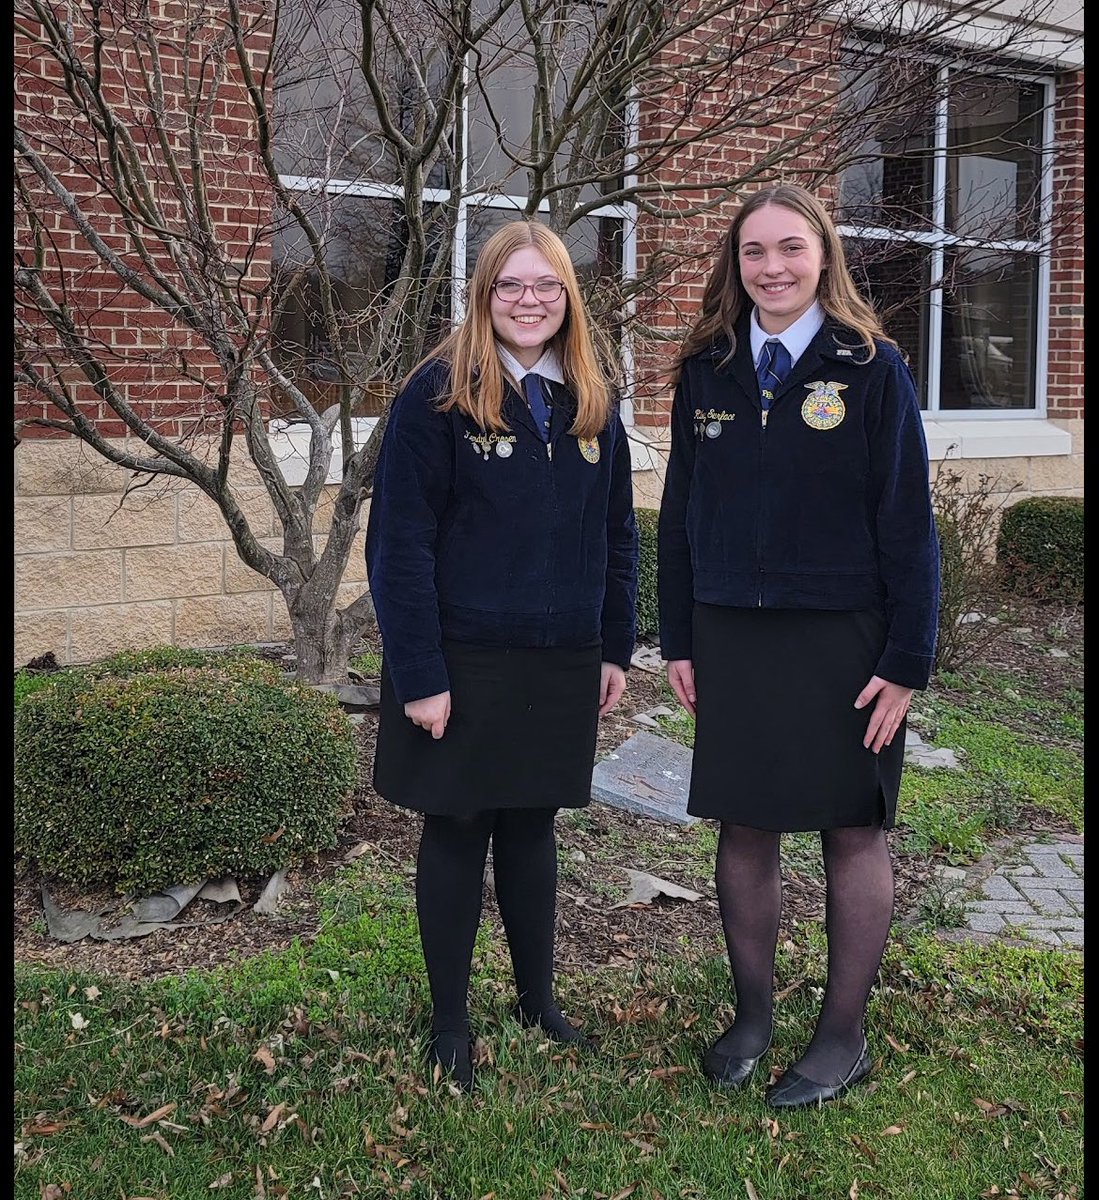 🏆 Riley Surface wins 1st in the Jr. Prepared Public Speaking contest with 'Empowering Tomorrow's Leaders' & advances to the area contest on Mar 22! 🌟 Kendyl Crosen takes 3rd in Extemporaneous Speaking, W.R. Legge FFA members with pride!